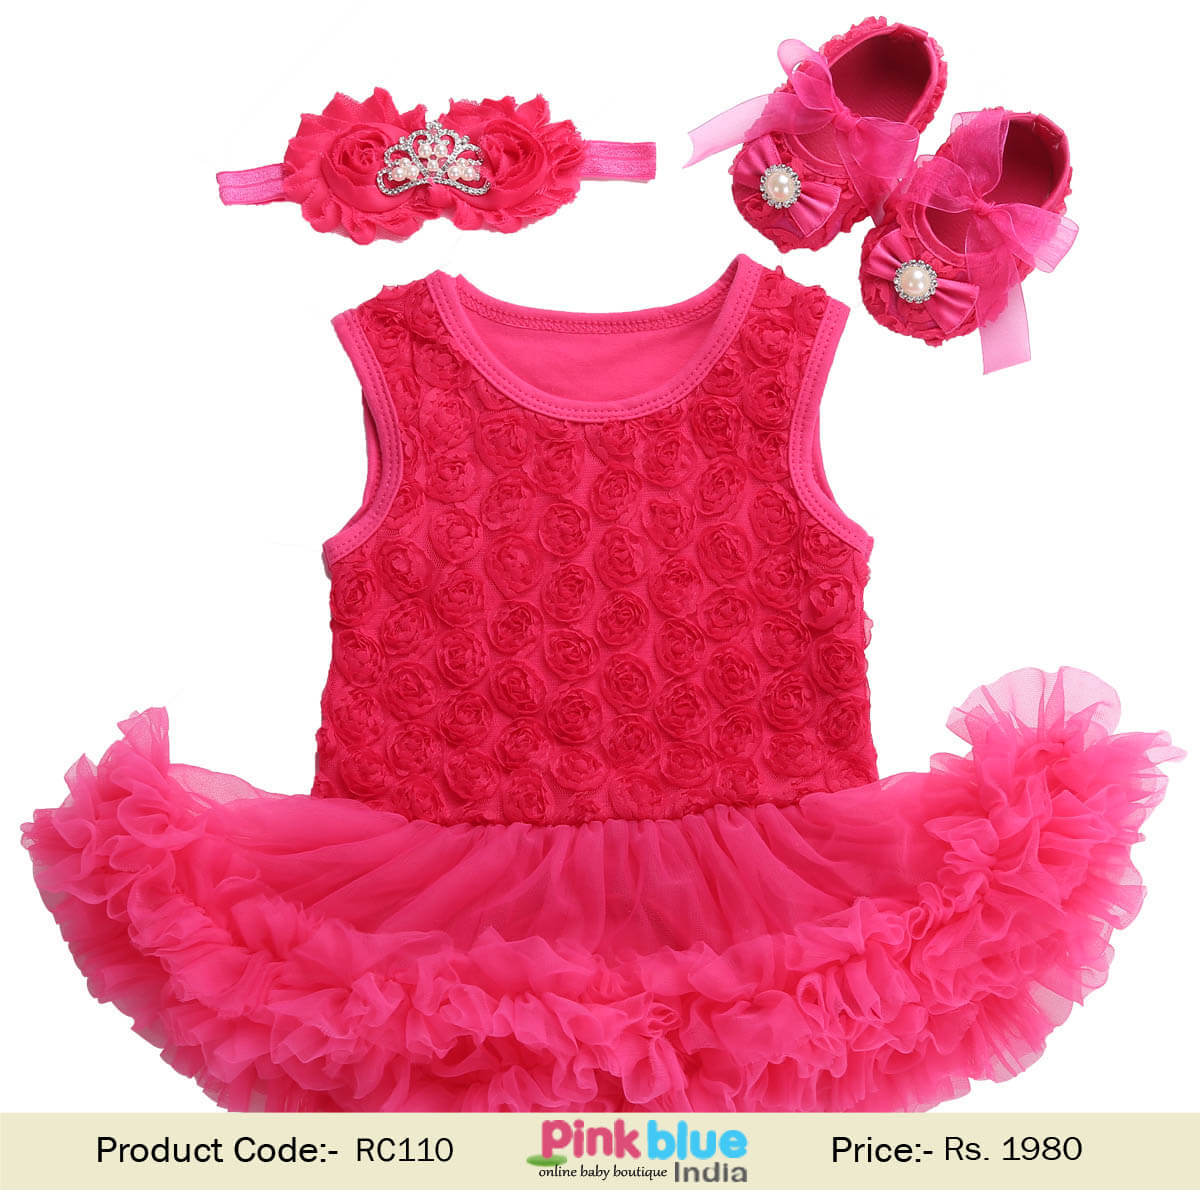 Rosette Flowers Pattern Baby Girls One Piece Romper Dress Clothes Set India